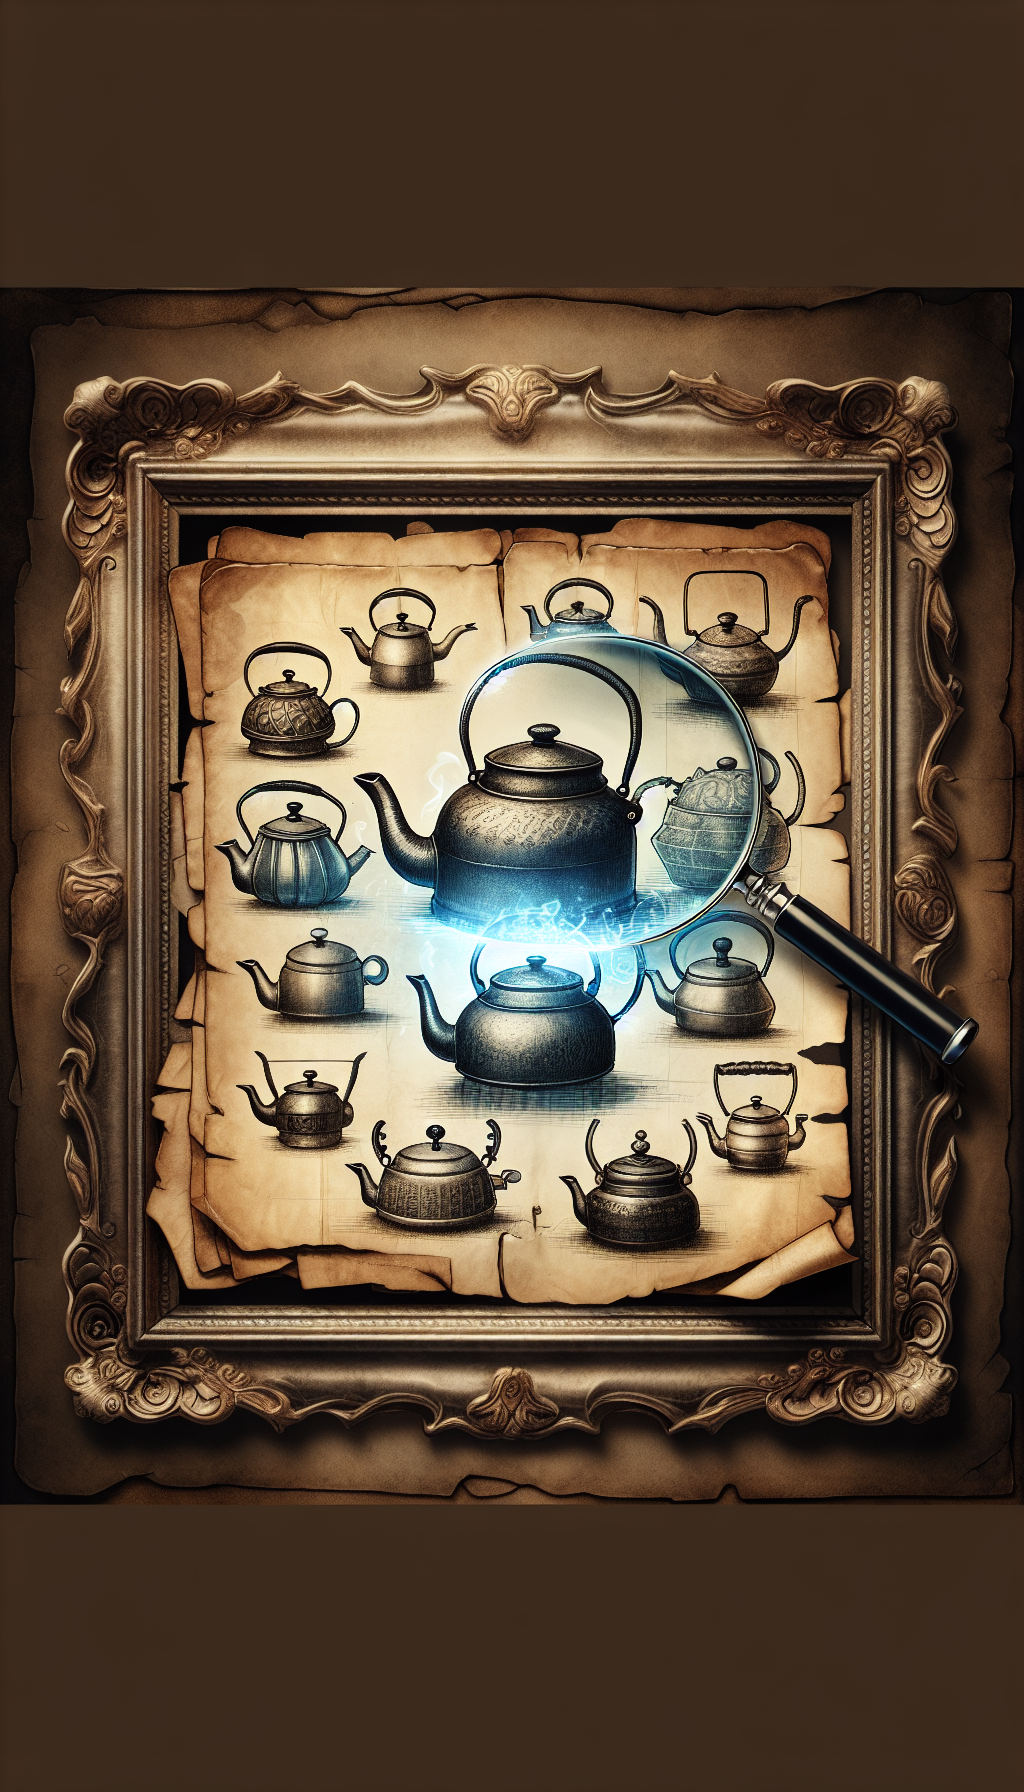 An illustration shows a semi-transparent layer of parchment over an antique cast iron kettle, covered with faded ink sketches of different kettles' identifying marks and ages. A magnifying glass hovers over the parchment, revealing a clear, glowing appraisal value beneath, symbolizing the revealed secrets of the kettle's worth through time's marks. Vintage frame and intricate scrollwork encompass the scene for an antique feel.